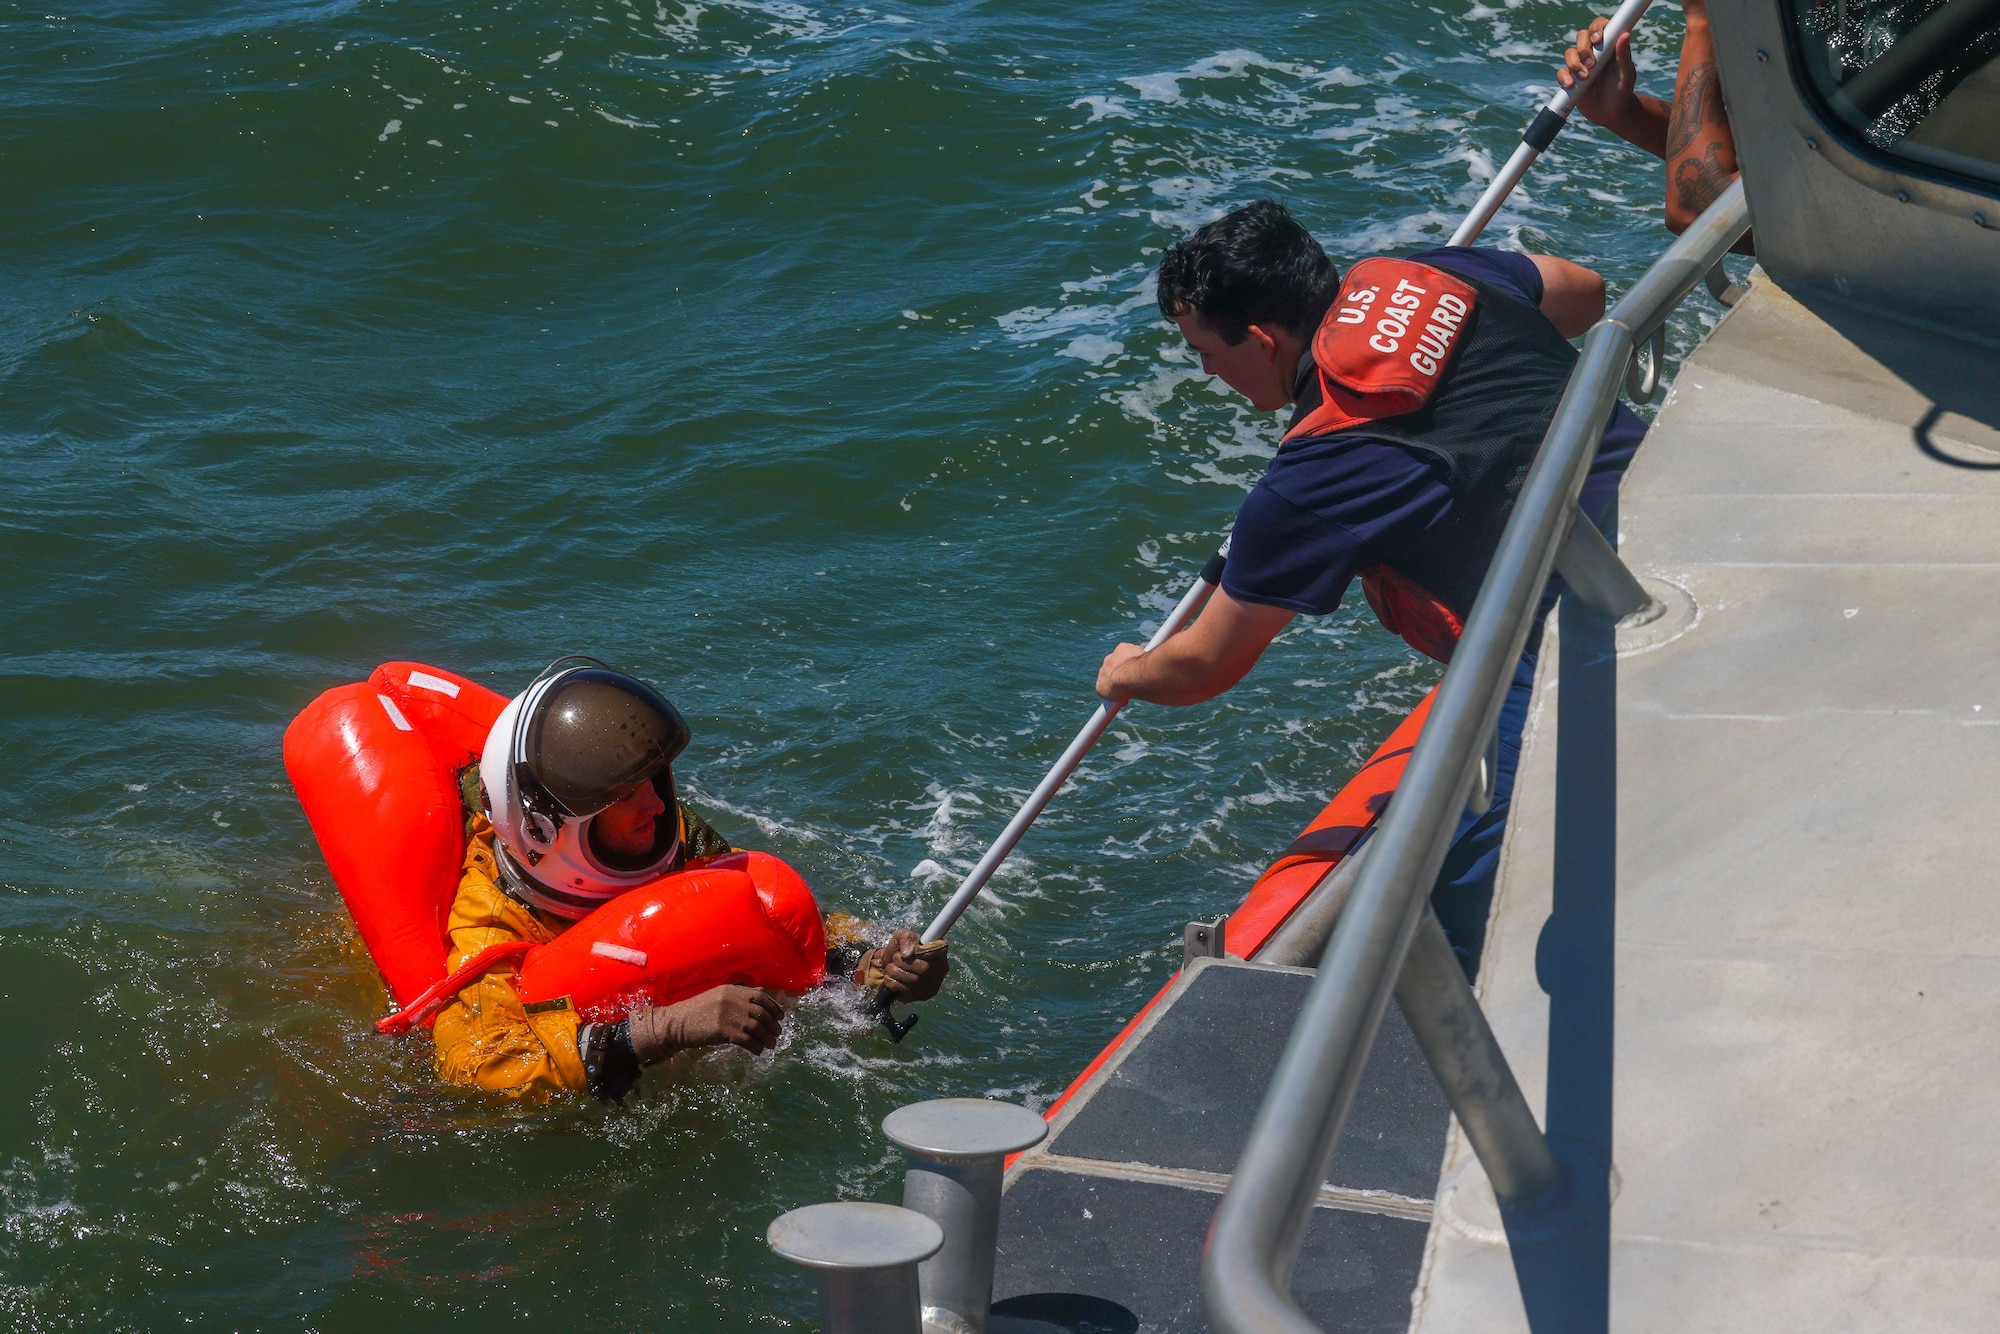 U.S. Air Force Capt. Kyle Carver, U-2 Pilot, 99 Reconnaissance Squadron, grabs hold of the rescue pole extended by U.S. Coast Guard Seaman Ethan Carter, Fireman, U.S. Coast Guard San Francisco Sector in the San Francisco Bay, California on Aug. 17, 2023.